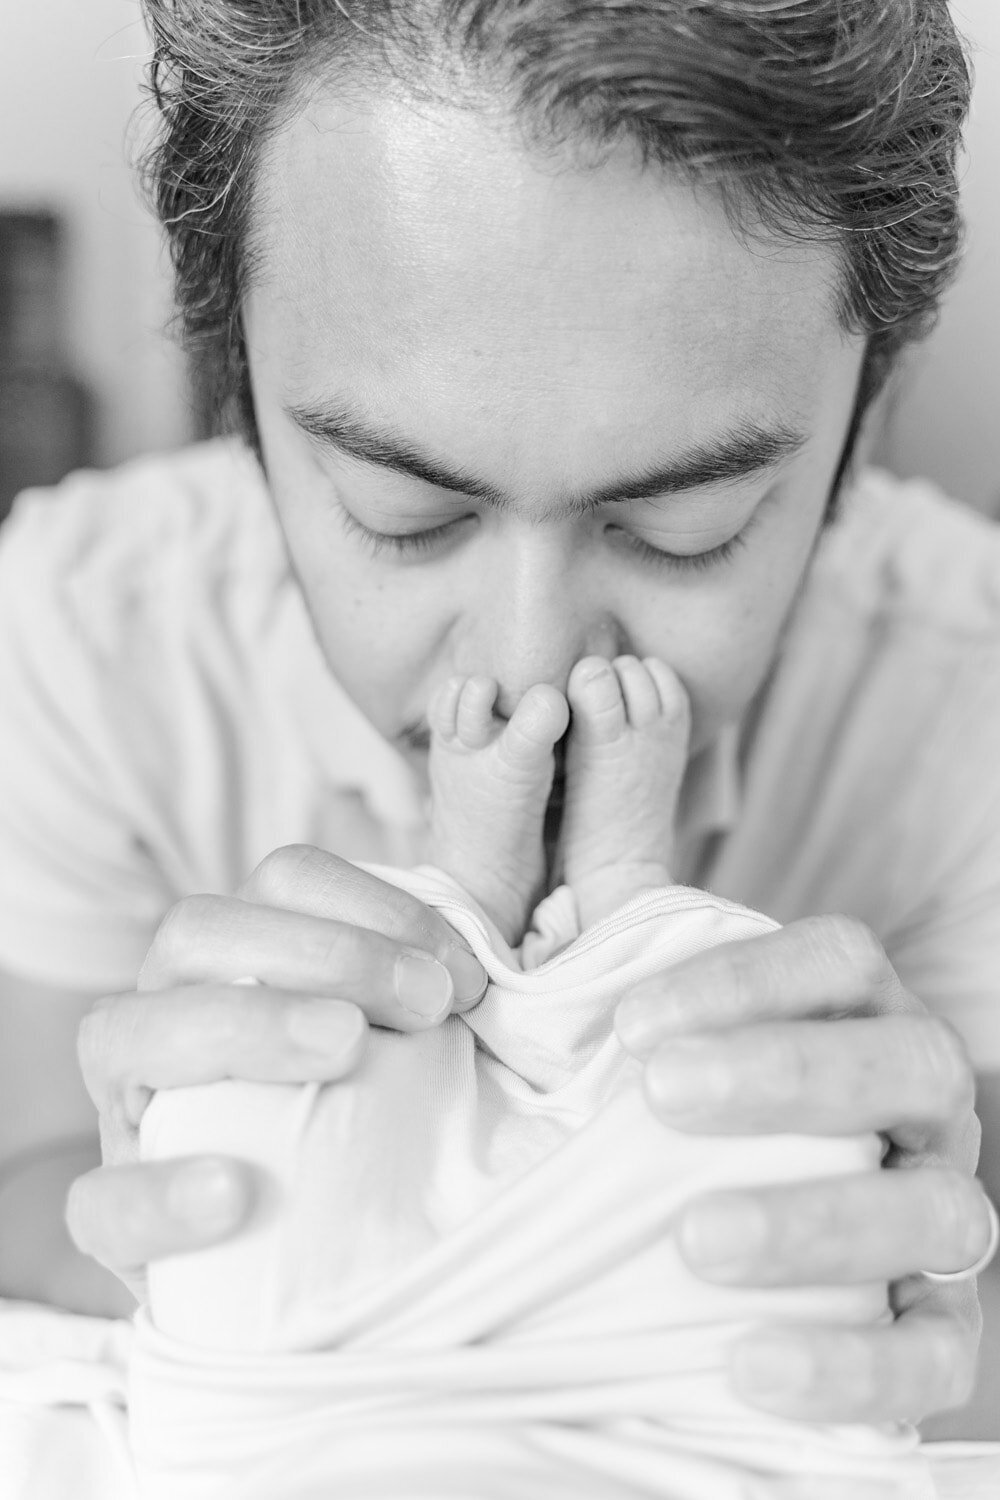 dad smelling baby's feet during lifestyle newborn photos in Northern VA